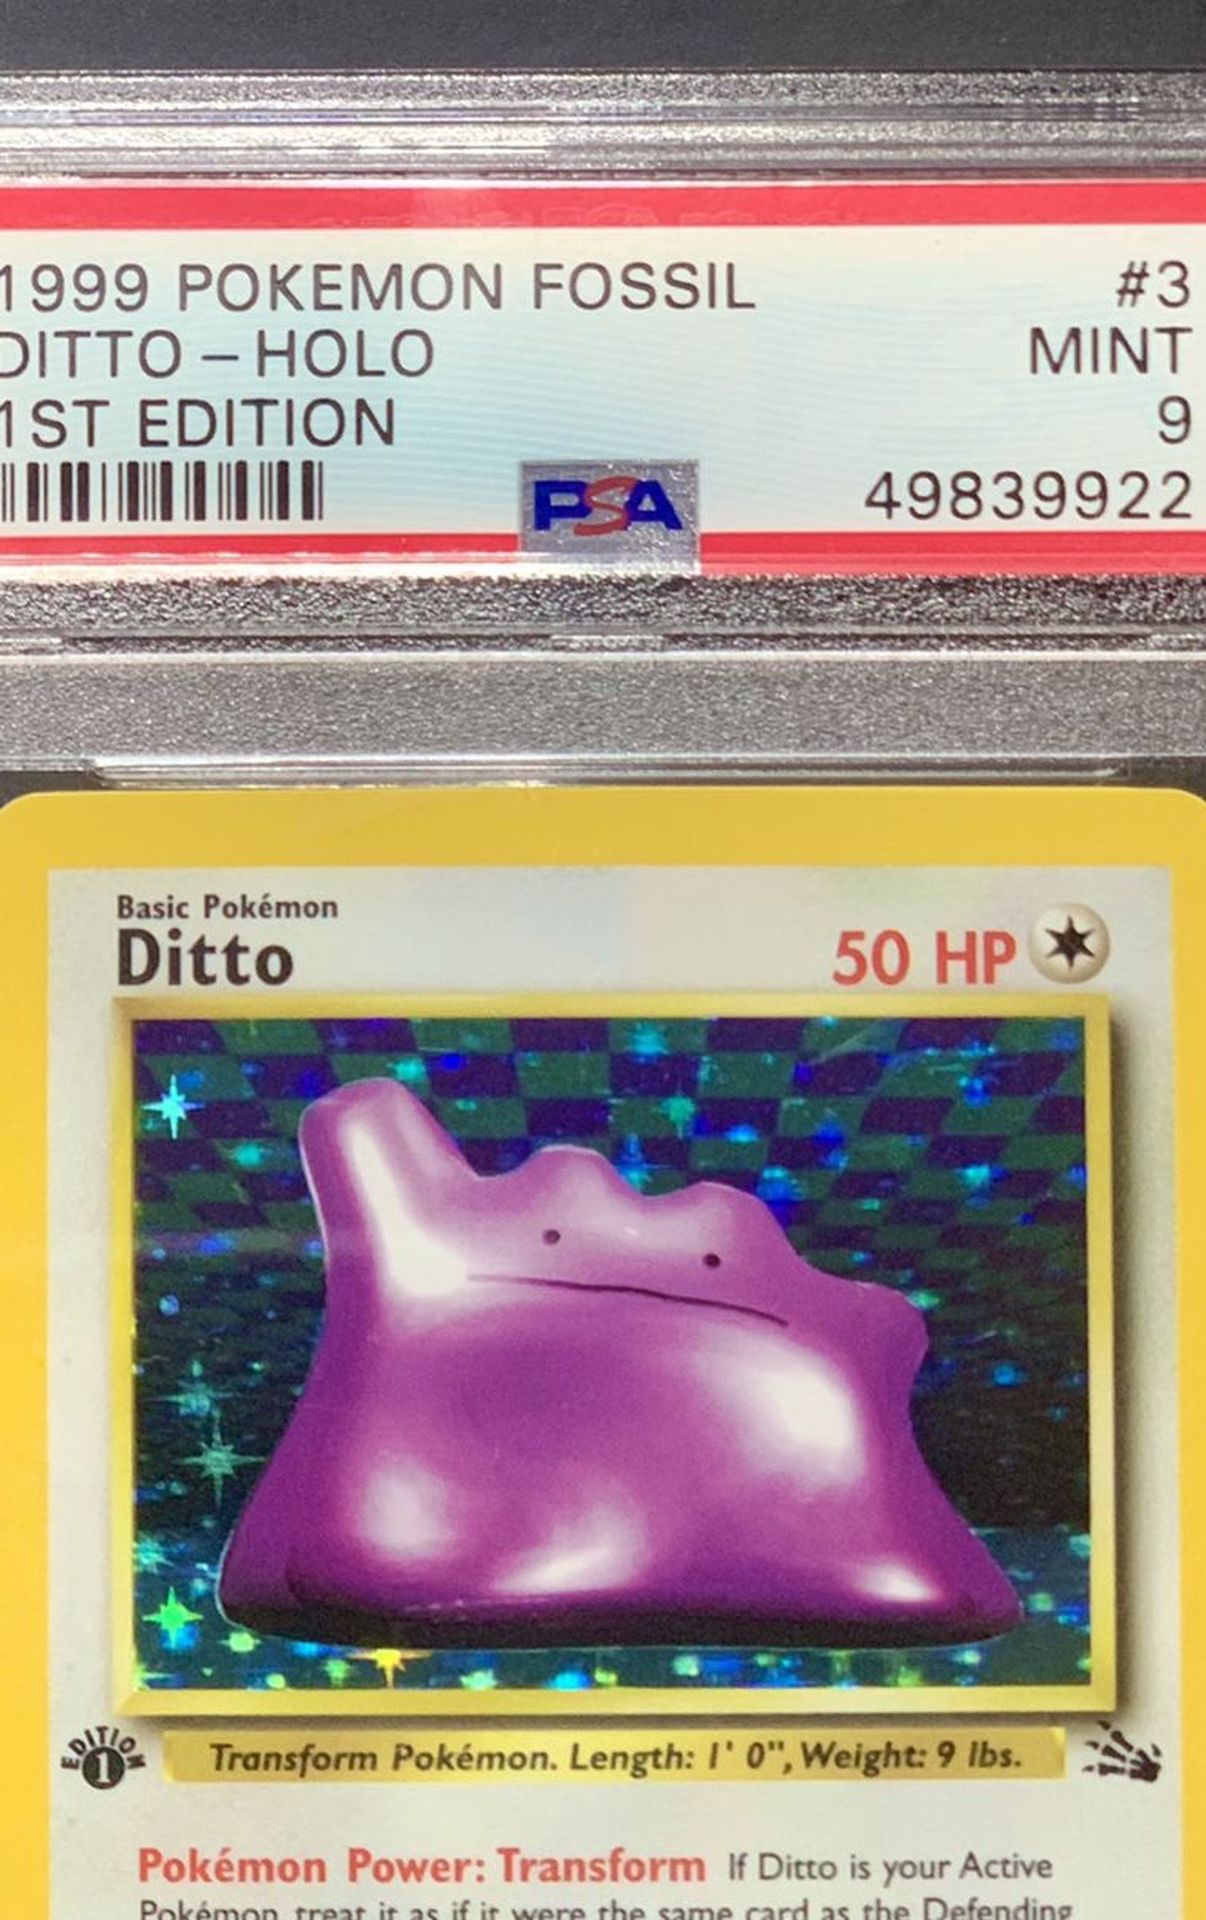 1999 Pokemon Fossil 1st Edition Holo Ditto #3 PSA 9 MINT